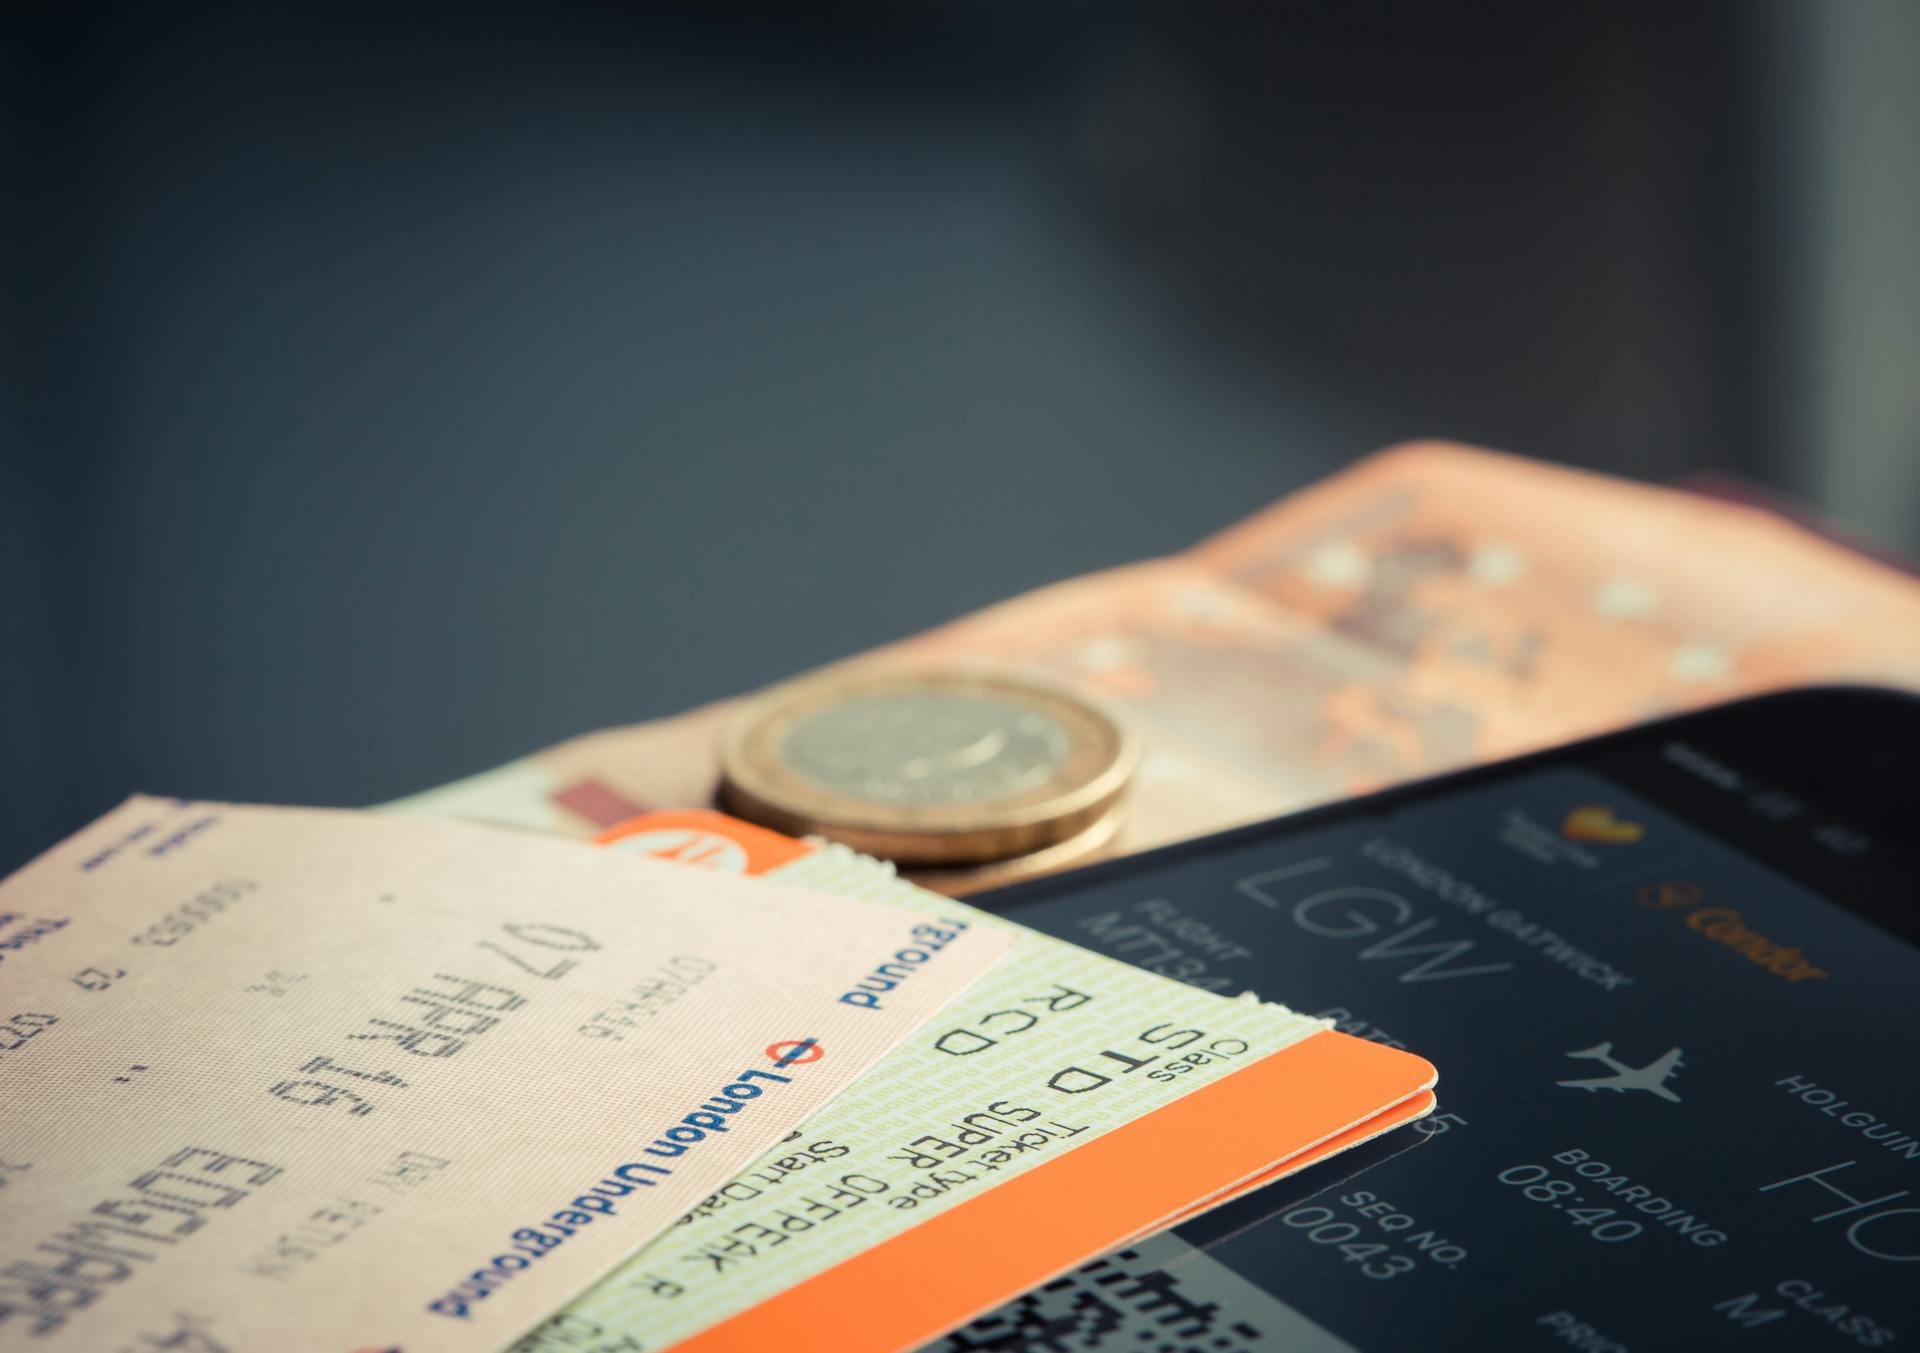 An airplane ticket | Source: Pexels